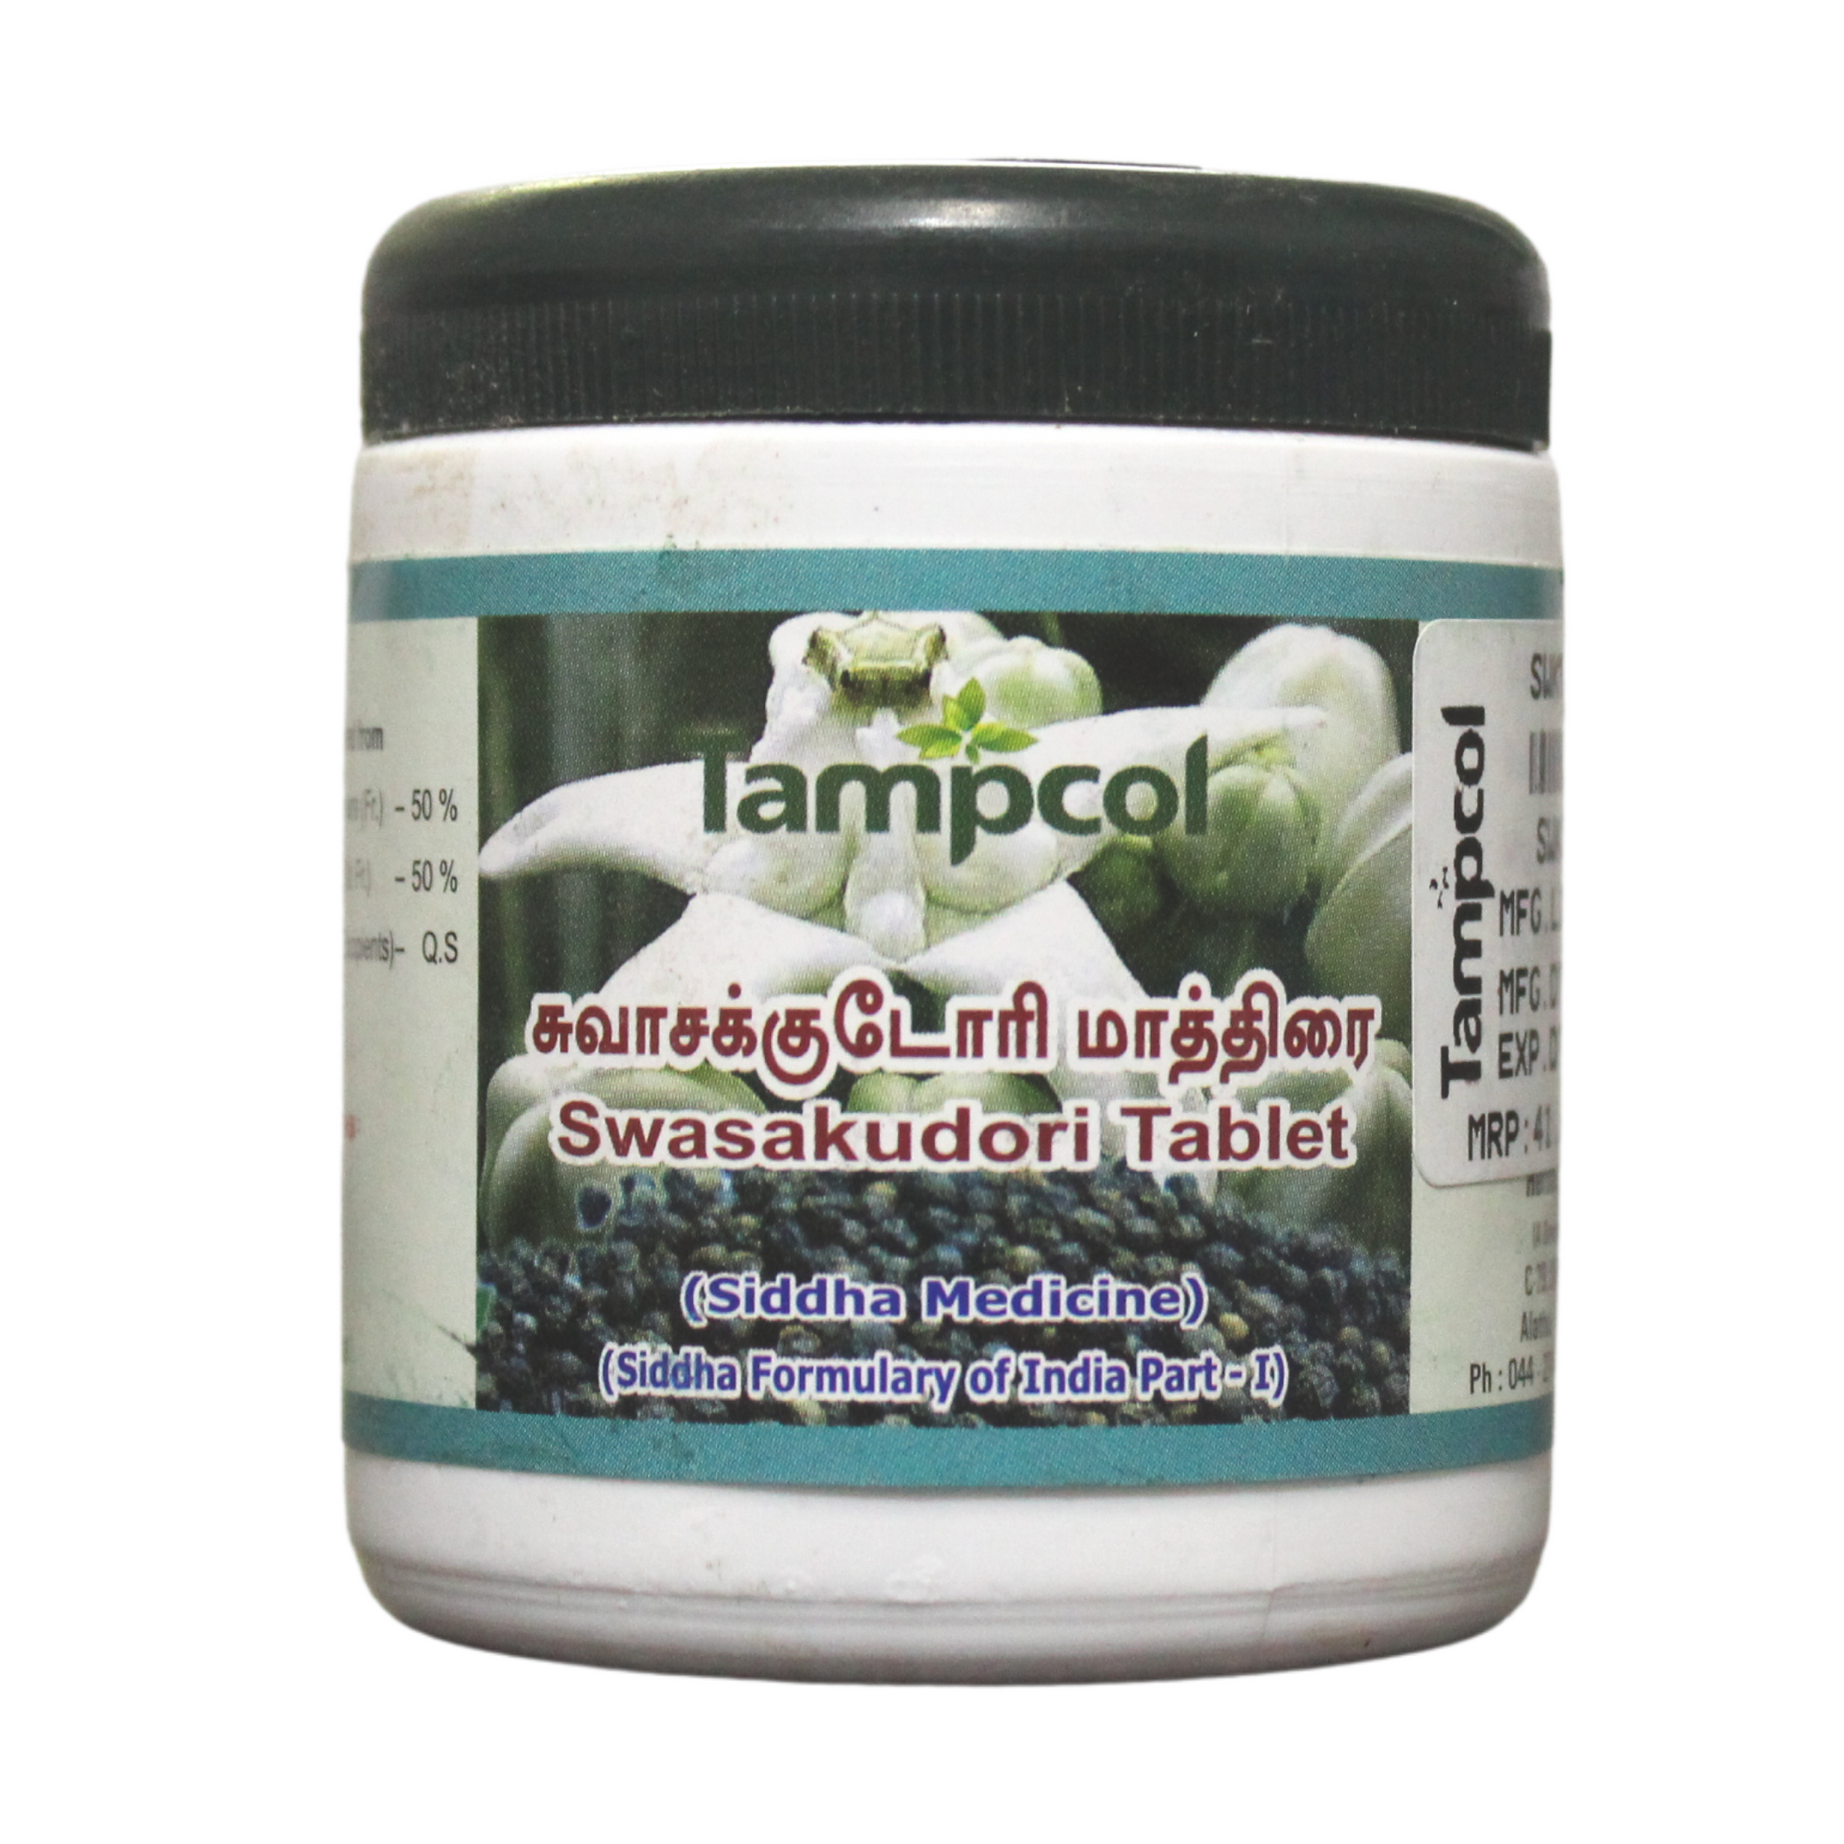 Shop Tampcol Swasakudori Tablets - 100 Tablets at price 41.00 from Tampcol Online - Ayush Care